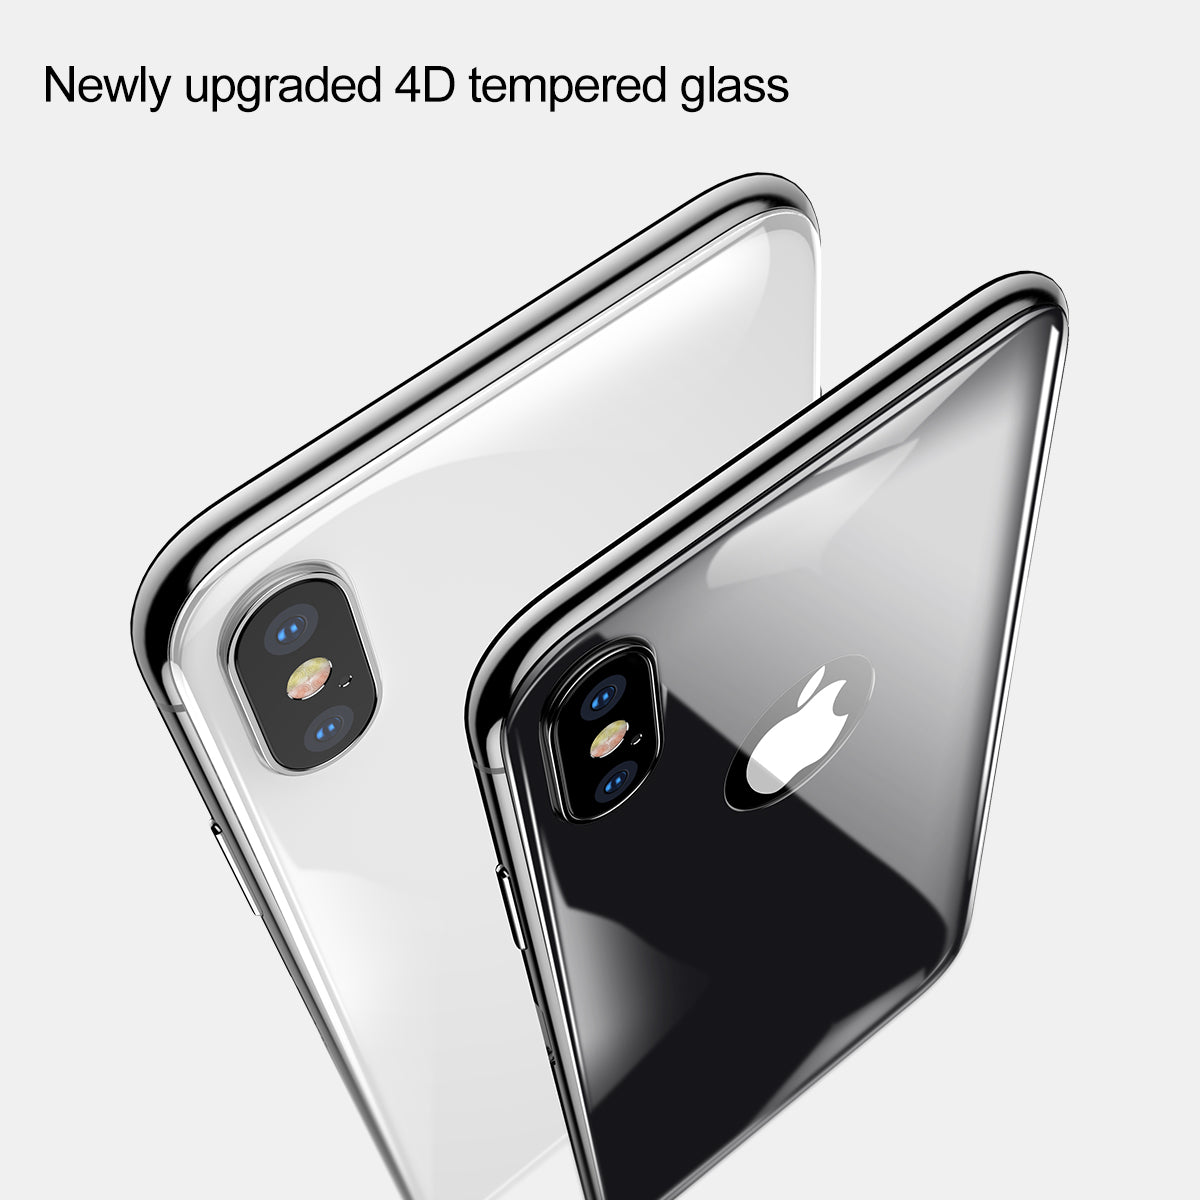 iPhone-X-Rear-Tempered-Glass-Silver-Top_S0C9B7DUTG4M.jpg